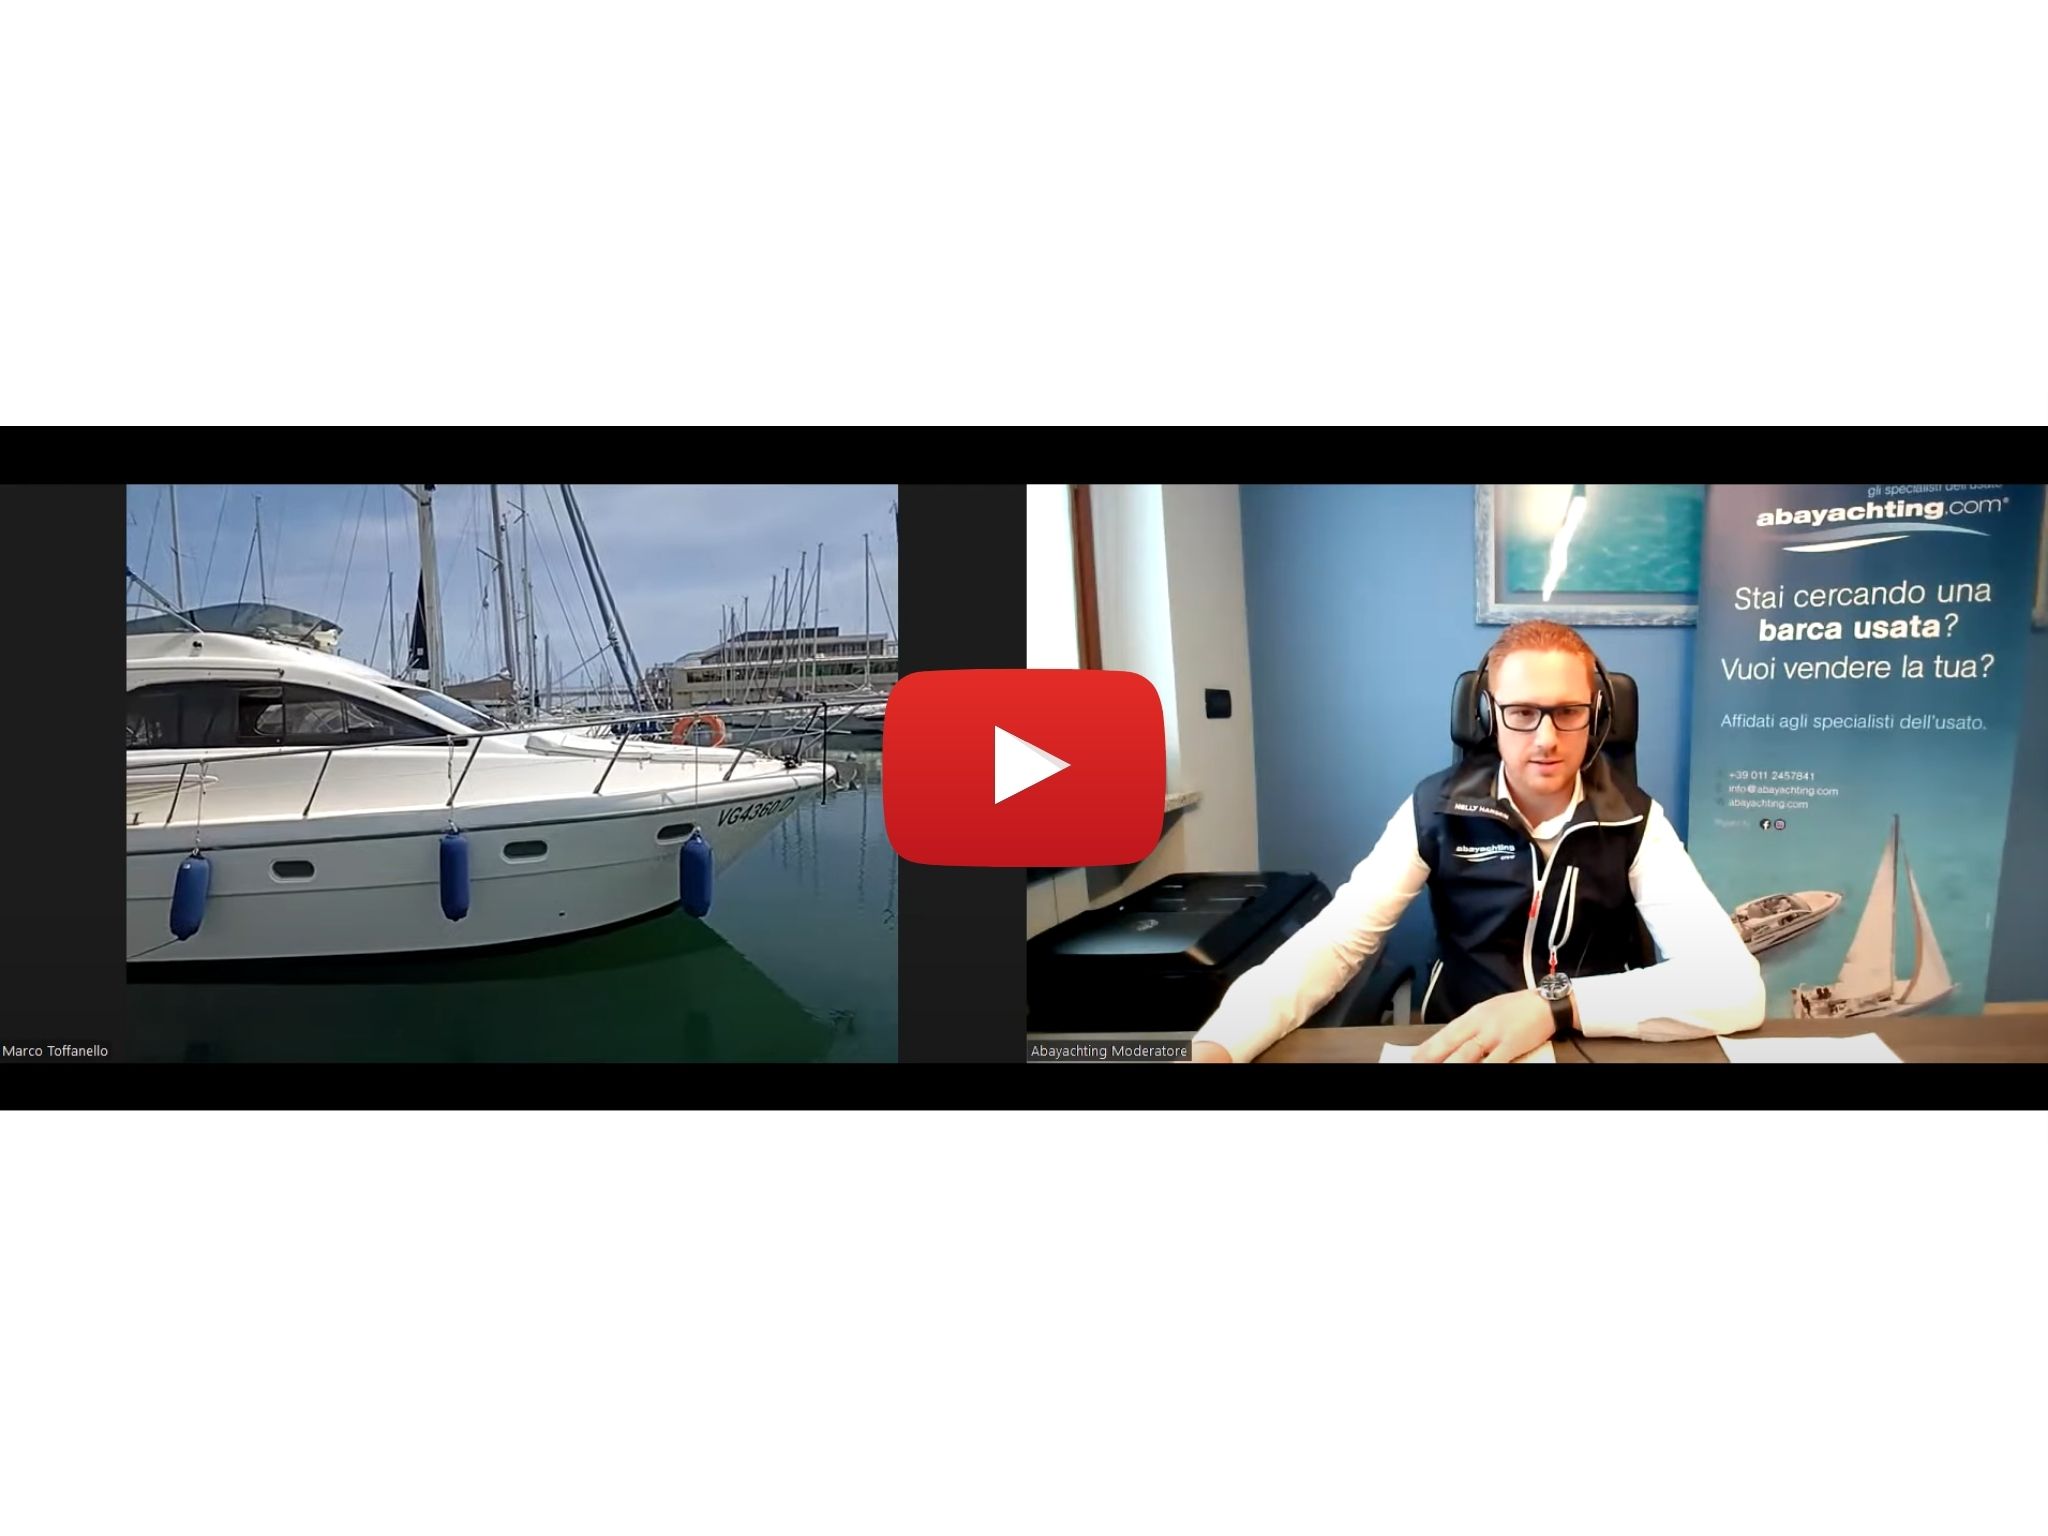 5th Live Used Boat Show Video | 22-23 October 2022: a new way to sell your boat!